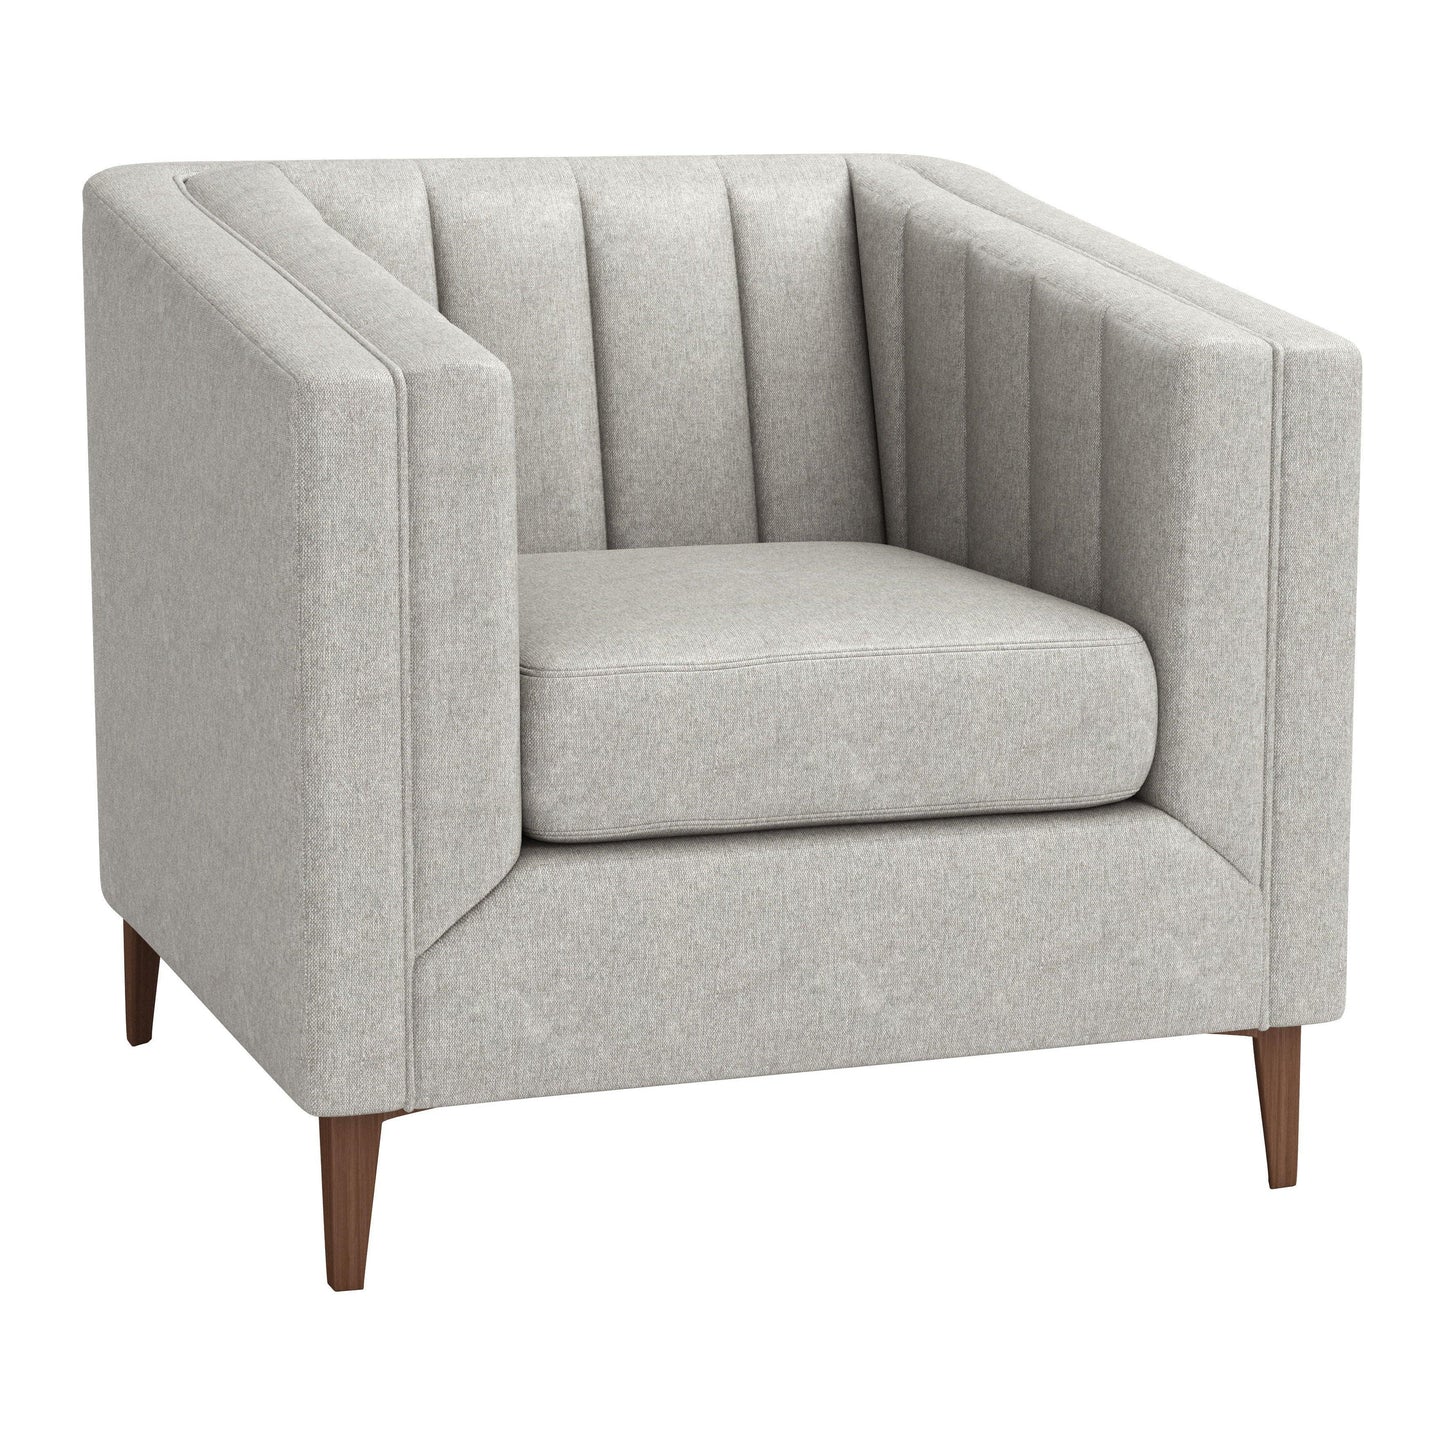 Nantucket Arm Chair Light Gray - Sideboards and Things Brand_Zuo Modern, Color_Brown, Color_Gray, Materials_Upholstery, Product Type_Arm Chair, Upholstery Type_Fabric Blend, Upholstery Type_Leather, Upholstery Type_Polyester, Upholstery Type_Vegan Leather